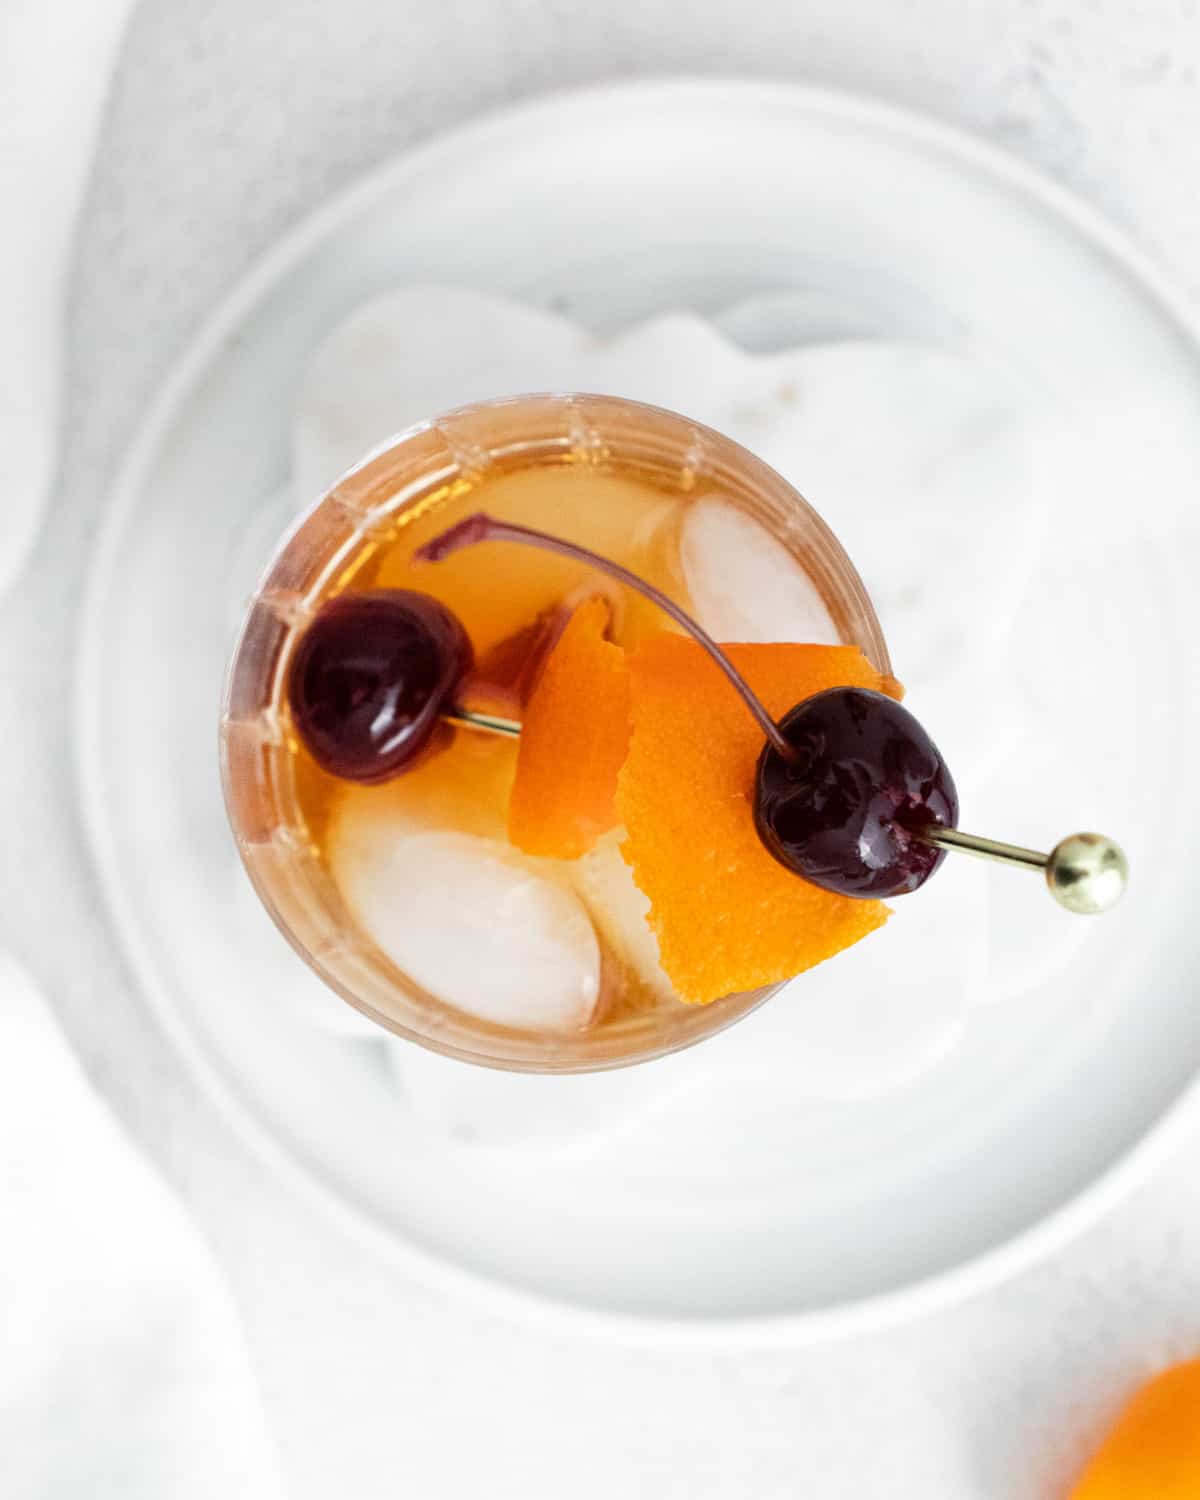 Overhead view of a drink with orange peel and cherries.